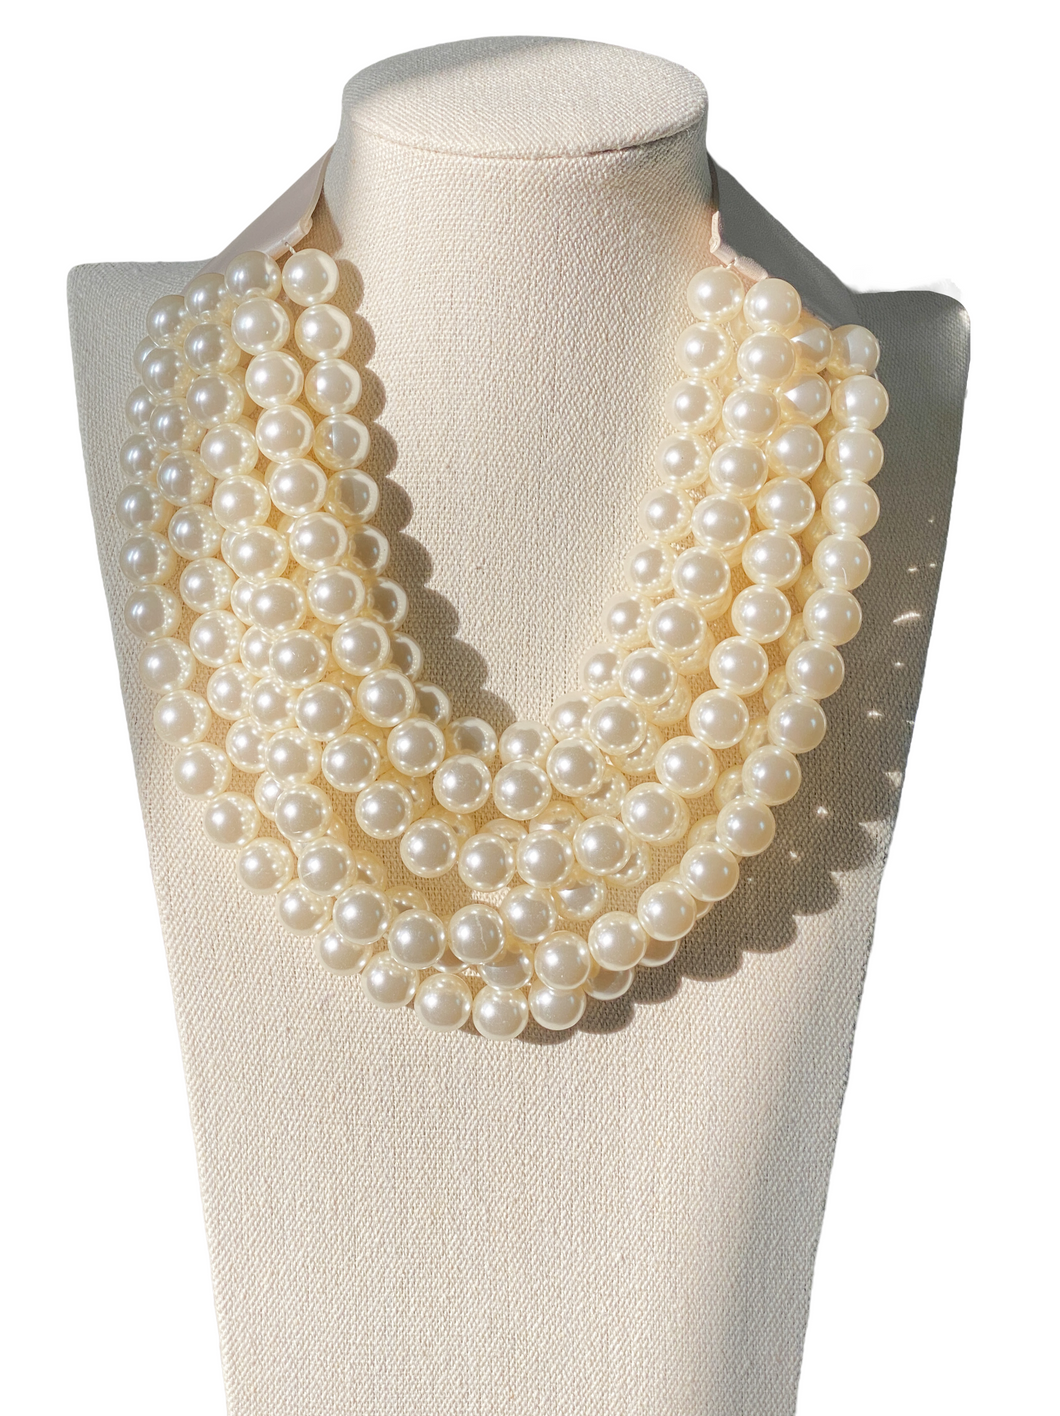 Shannan Beaded Layered Necklace | Pearls